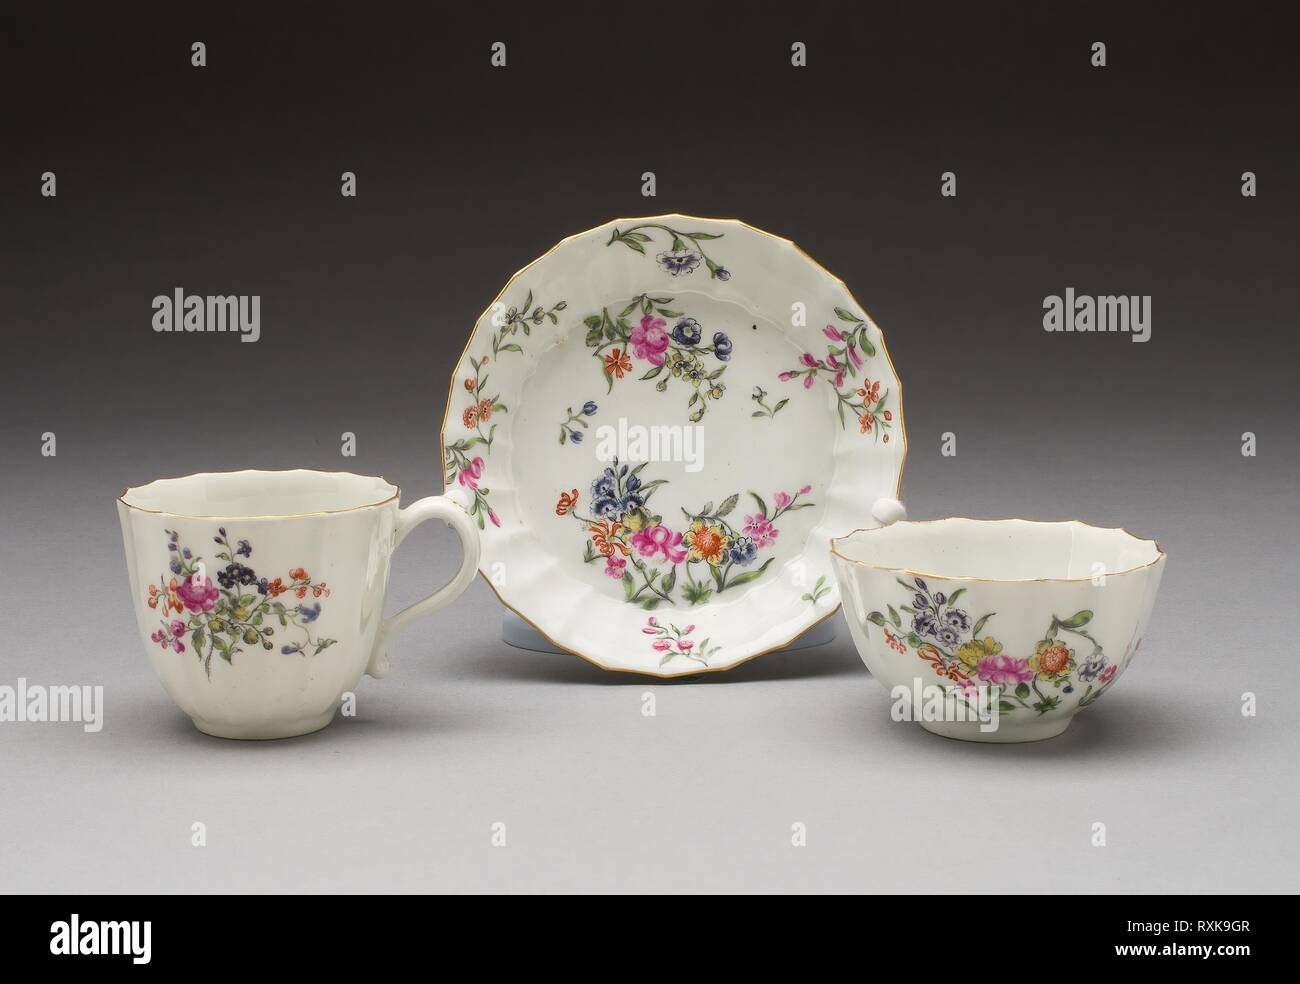 https://c8.alamy.com/comp/RXK9GR/tea-bowl-coffee-cup-and-saucer-worcester-porcelain-factory-worcester-england-founded-1751-date-1760-1770-dimensions-h-55-cm-2-316-in-diam-78-cm-3-116-in-soft-paste-porcelain-with-polychrome-enamels-and-gilding-origin-worcester-museum-the-chicago-art-institute-author-worcester-royal-porcelain-company-RXK9GR.jpg